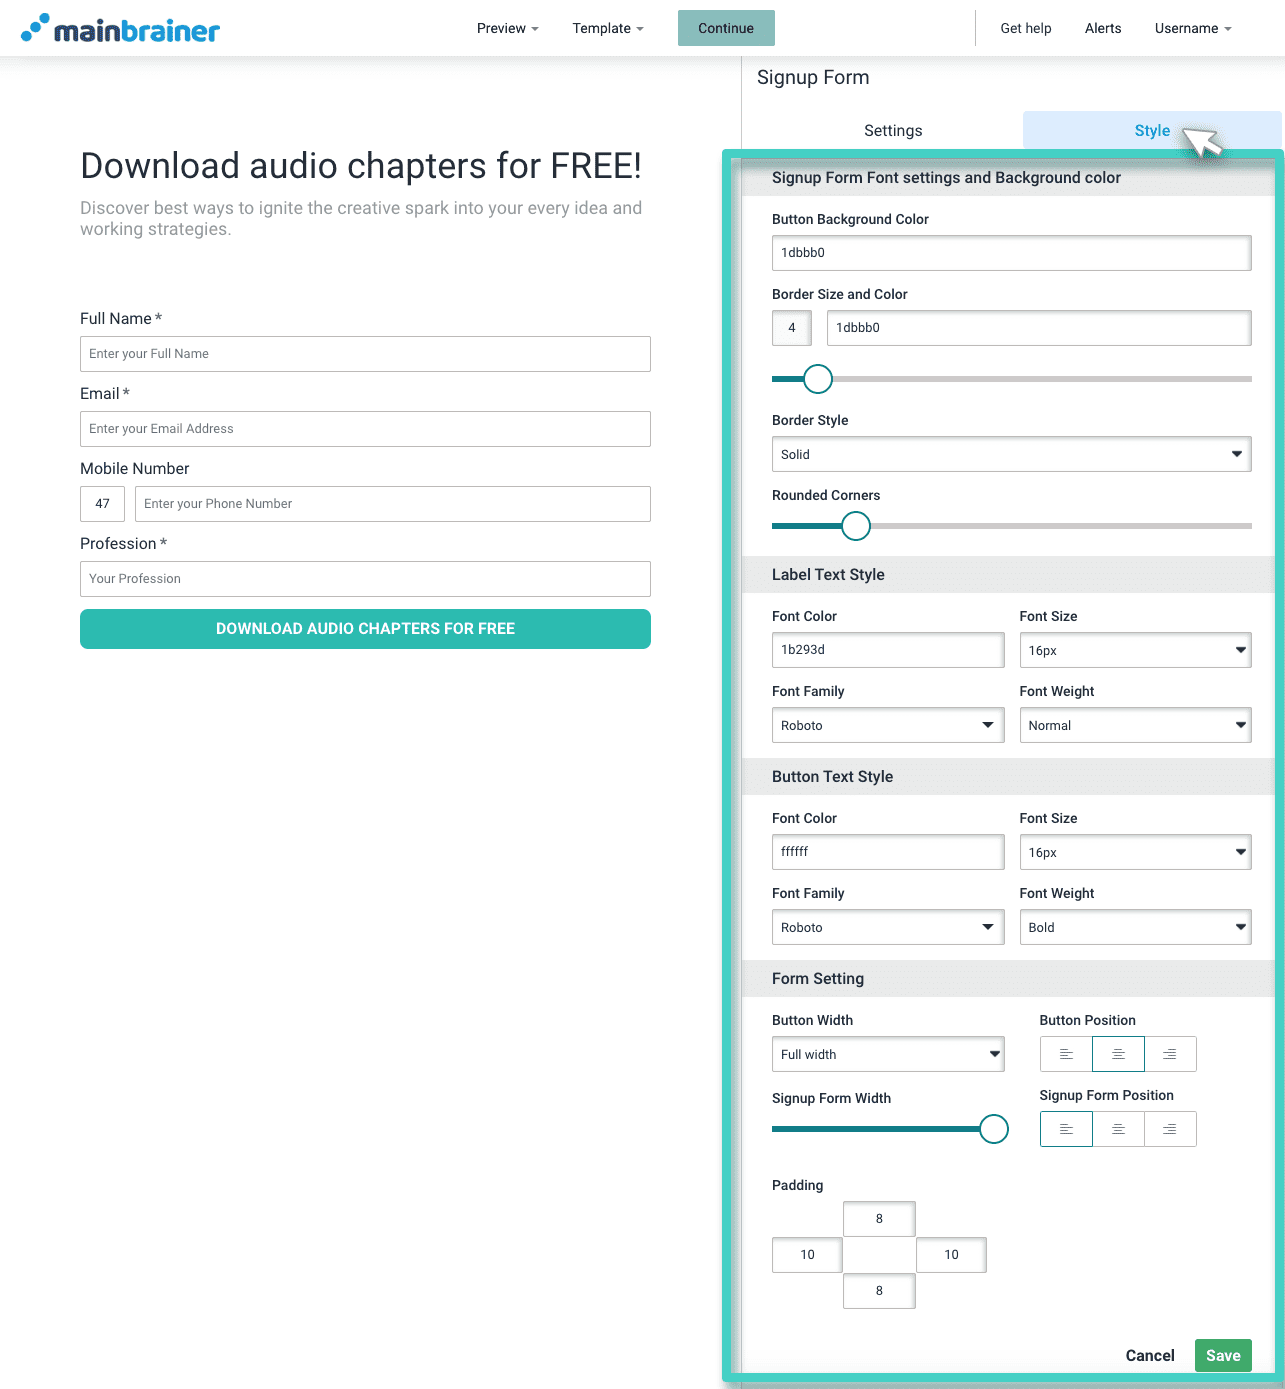 Landing page signup form. The signup form widget style tab is highlighted